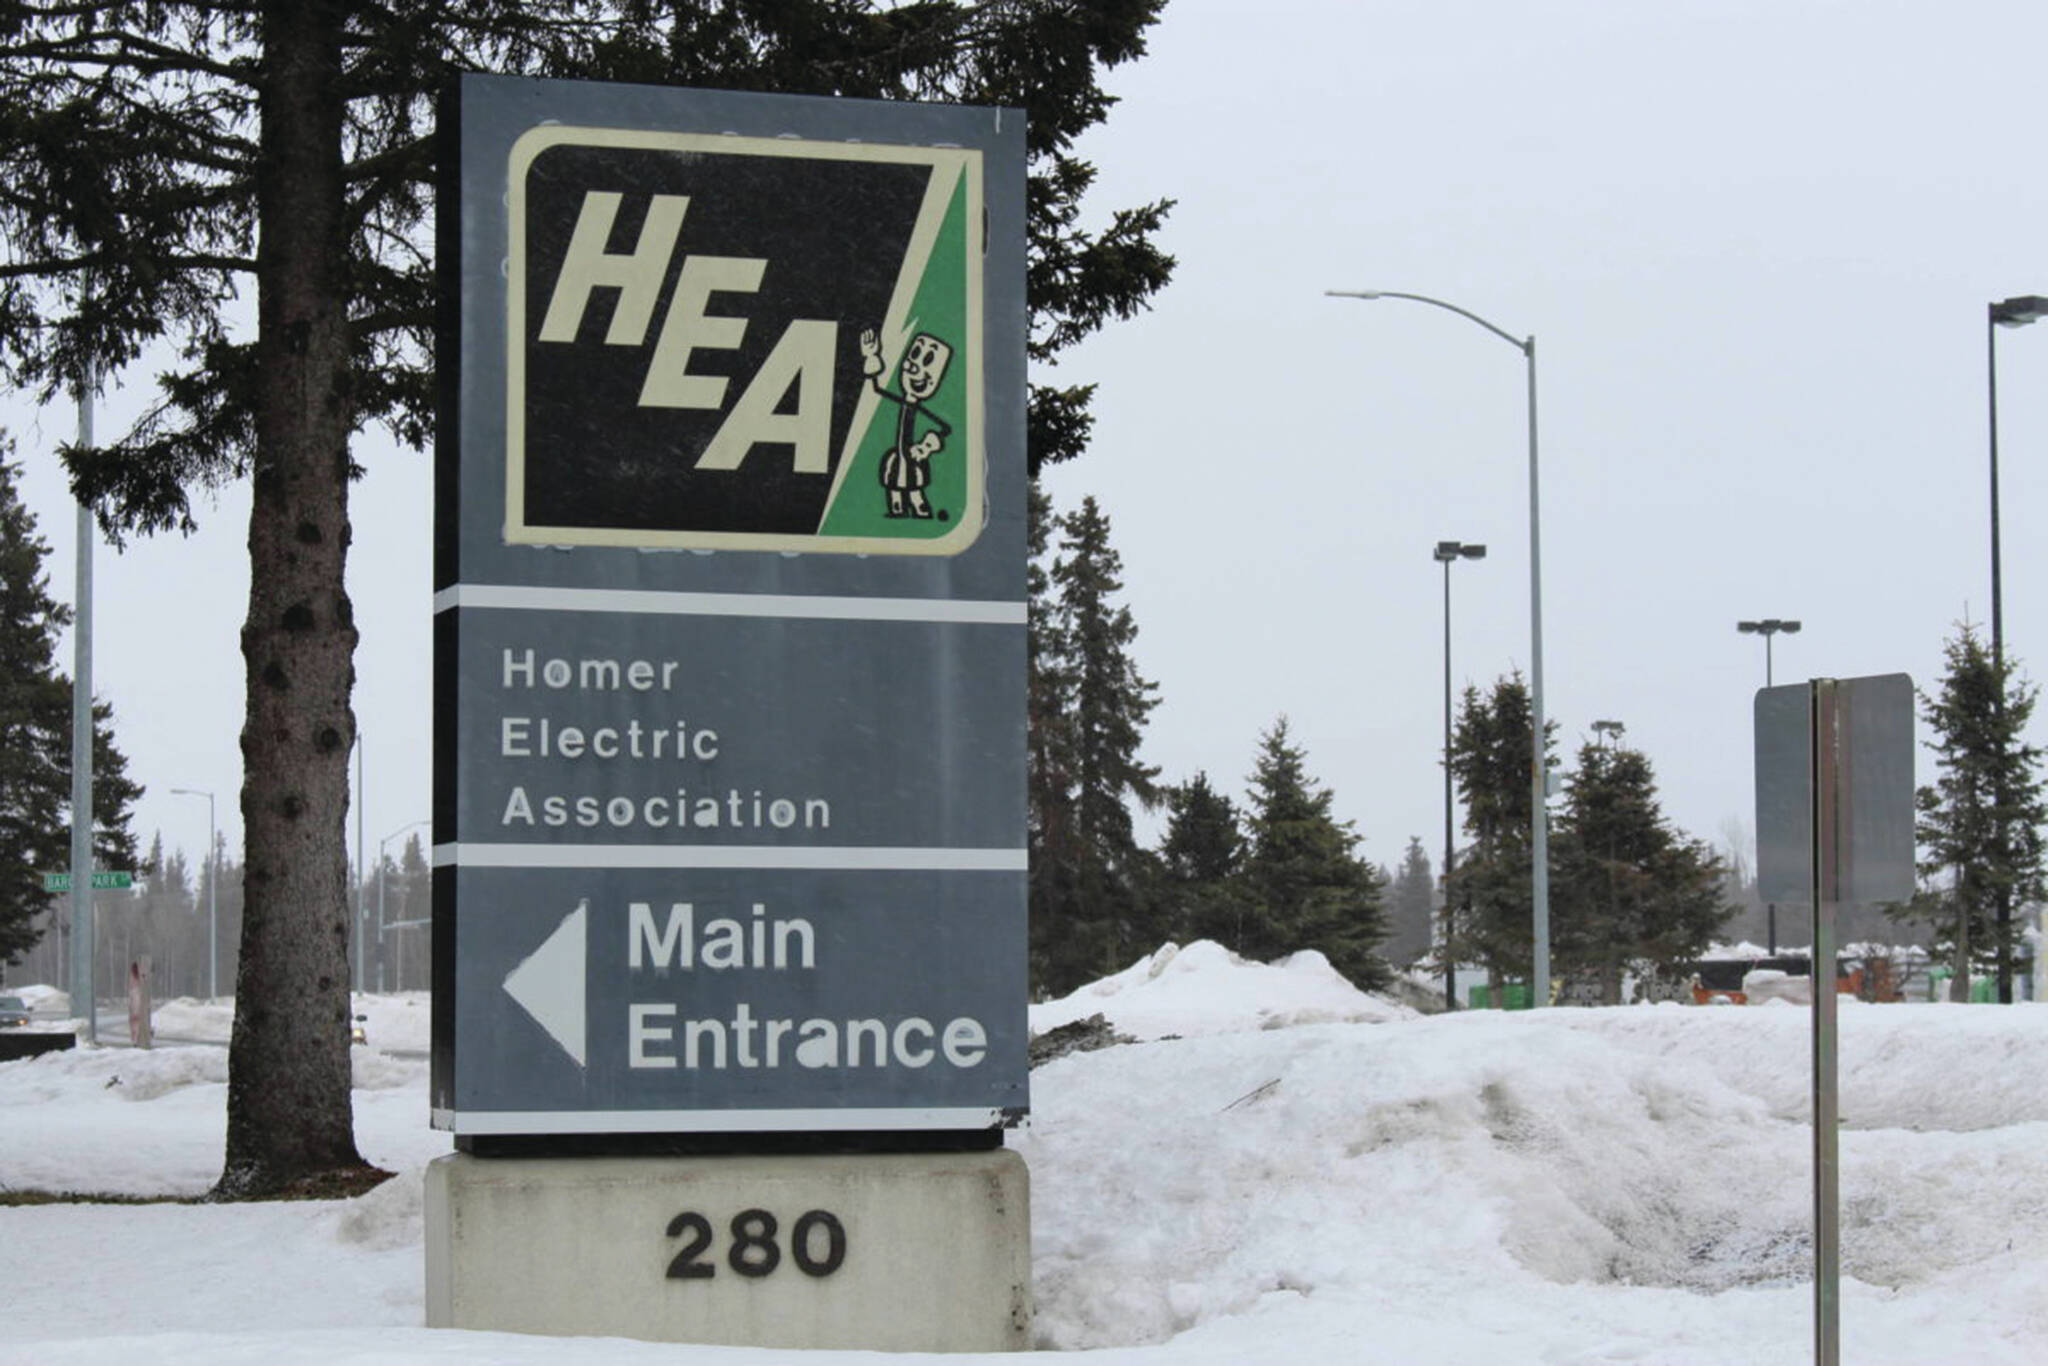 The sign in front of the Homer Electric Association building in Kenai, Alaska as seen on April 1, 2020. (Peninsula Clarion file)